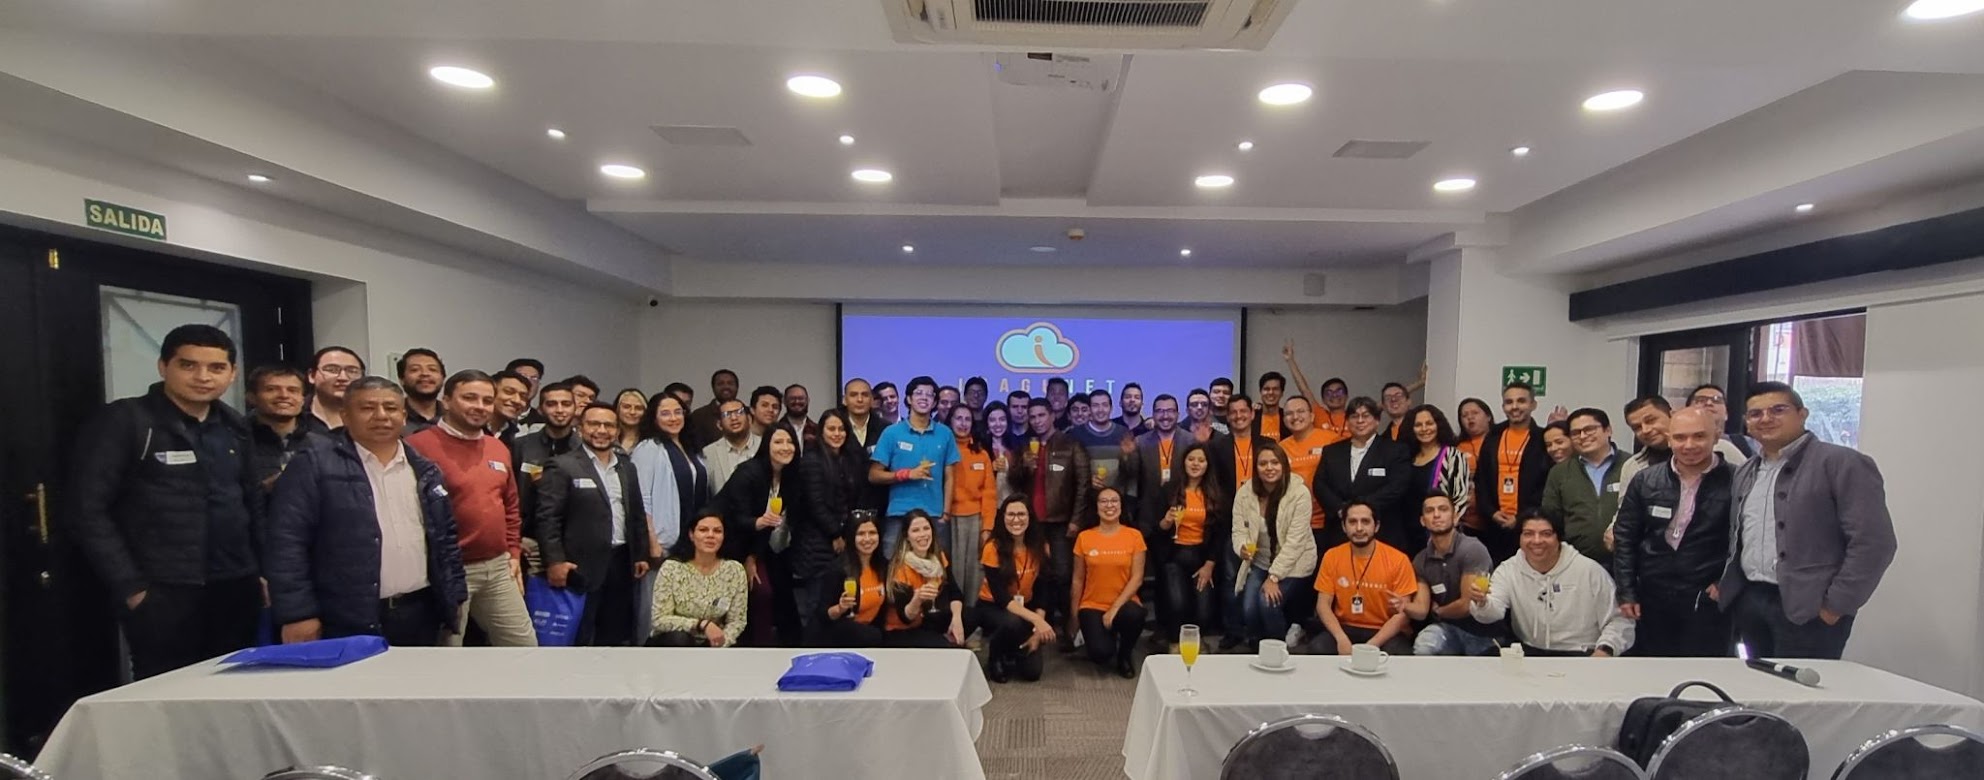 Some of the field experts who attended the Open Source meetup organized by Imagunet in Bogotá, Colombia